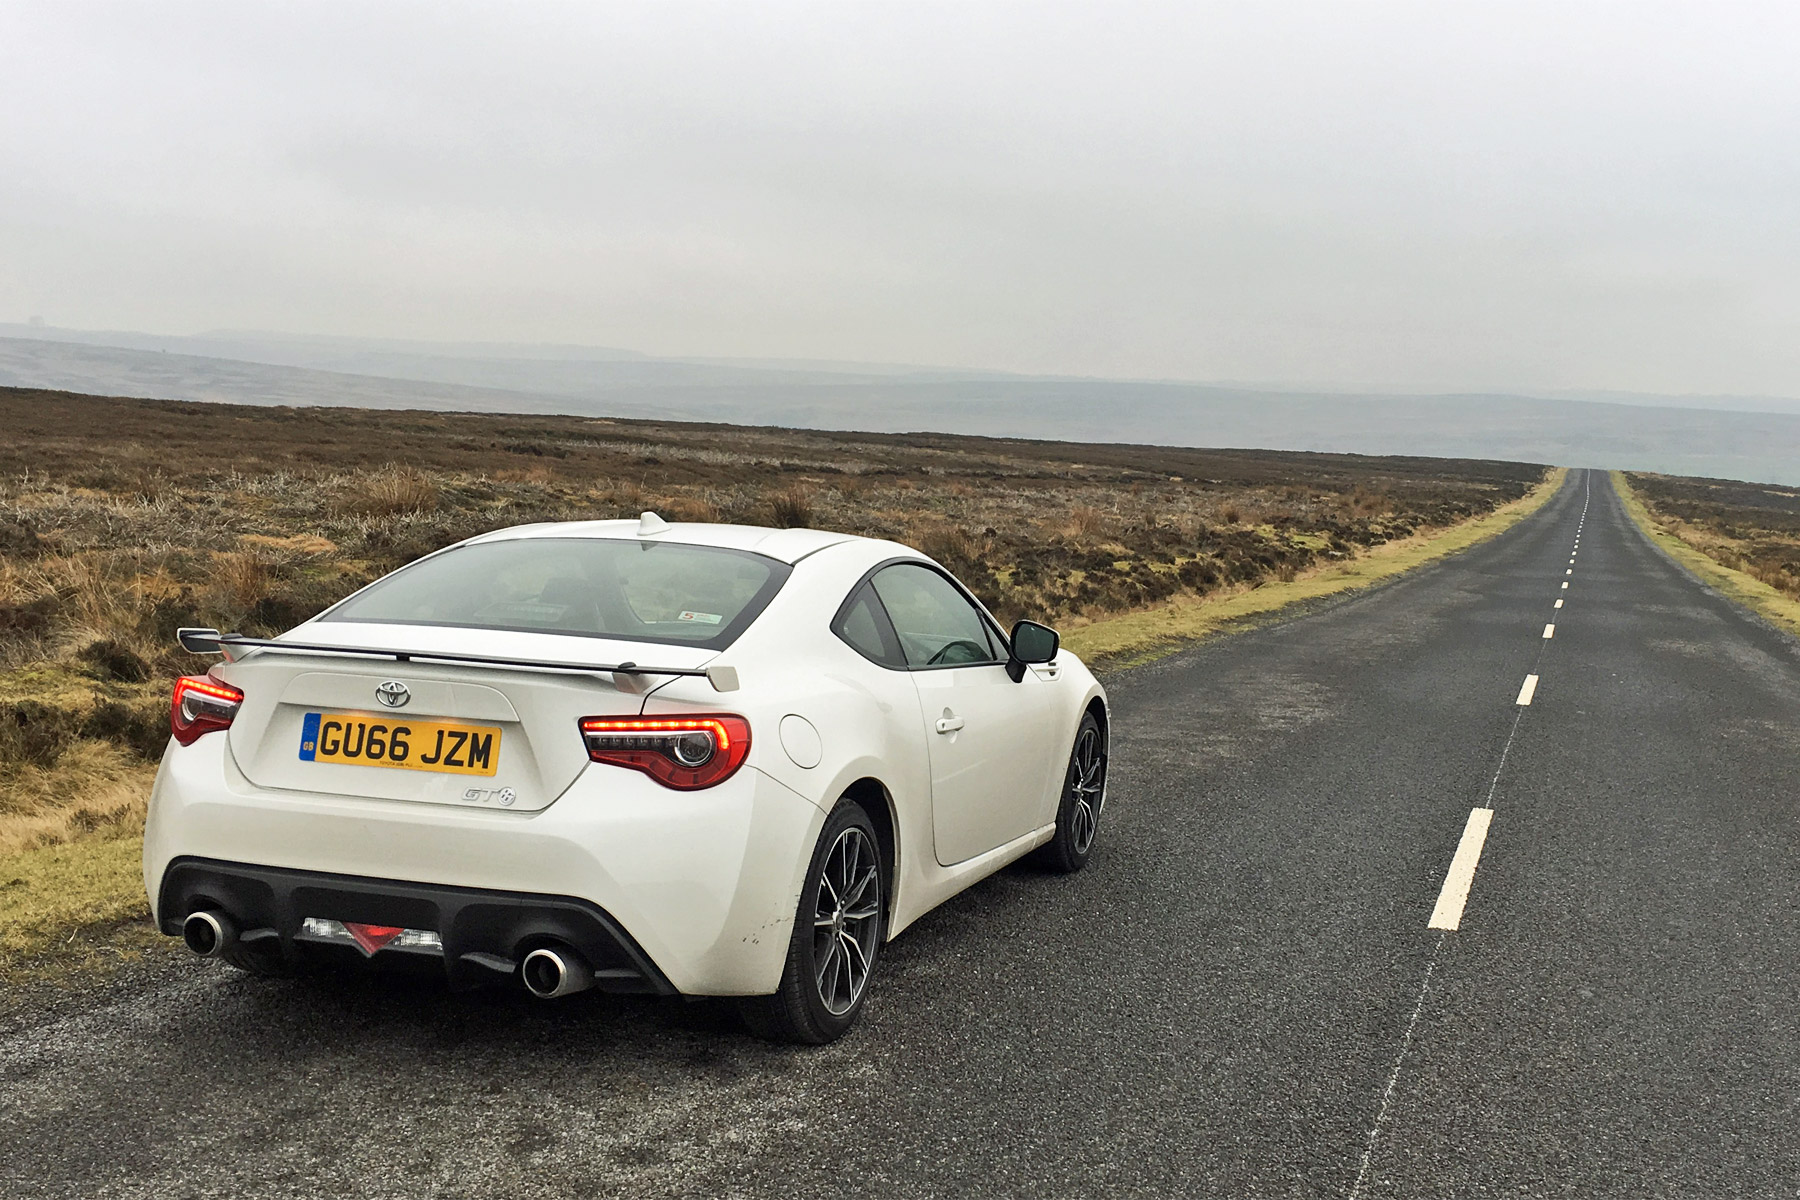 We took the Toyota GT86 on a road trip to find out why no one’s buying it